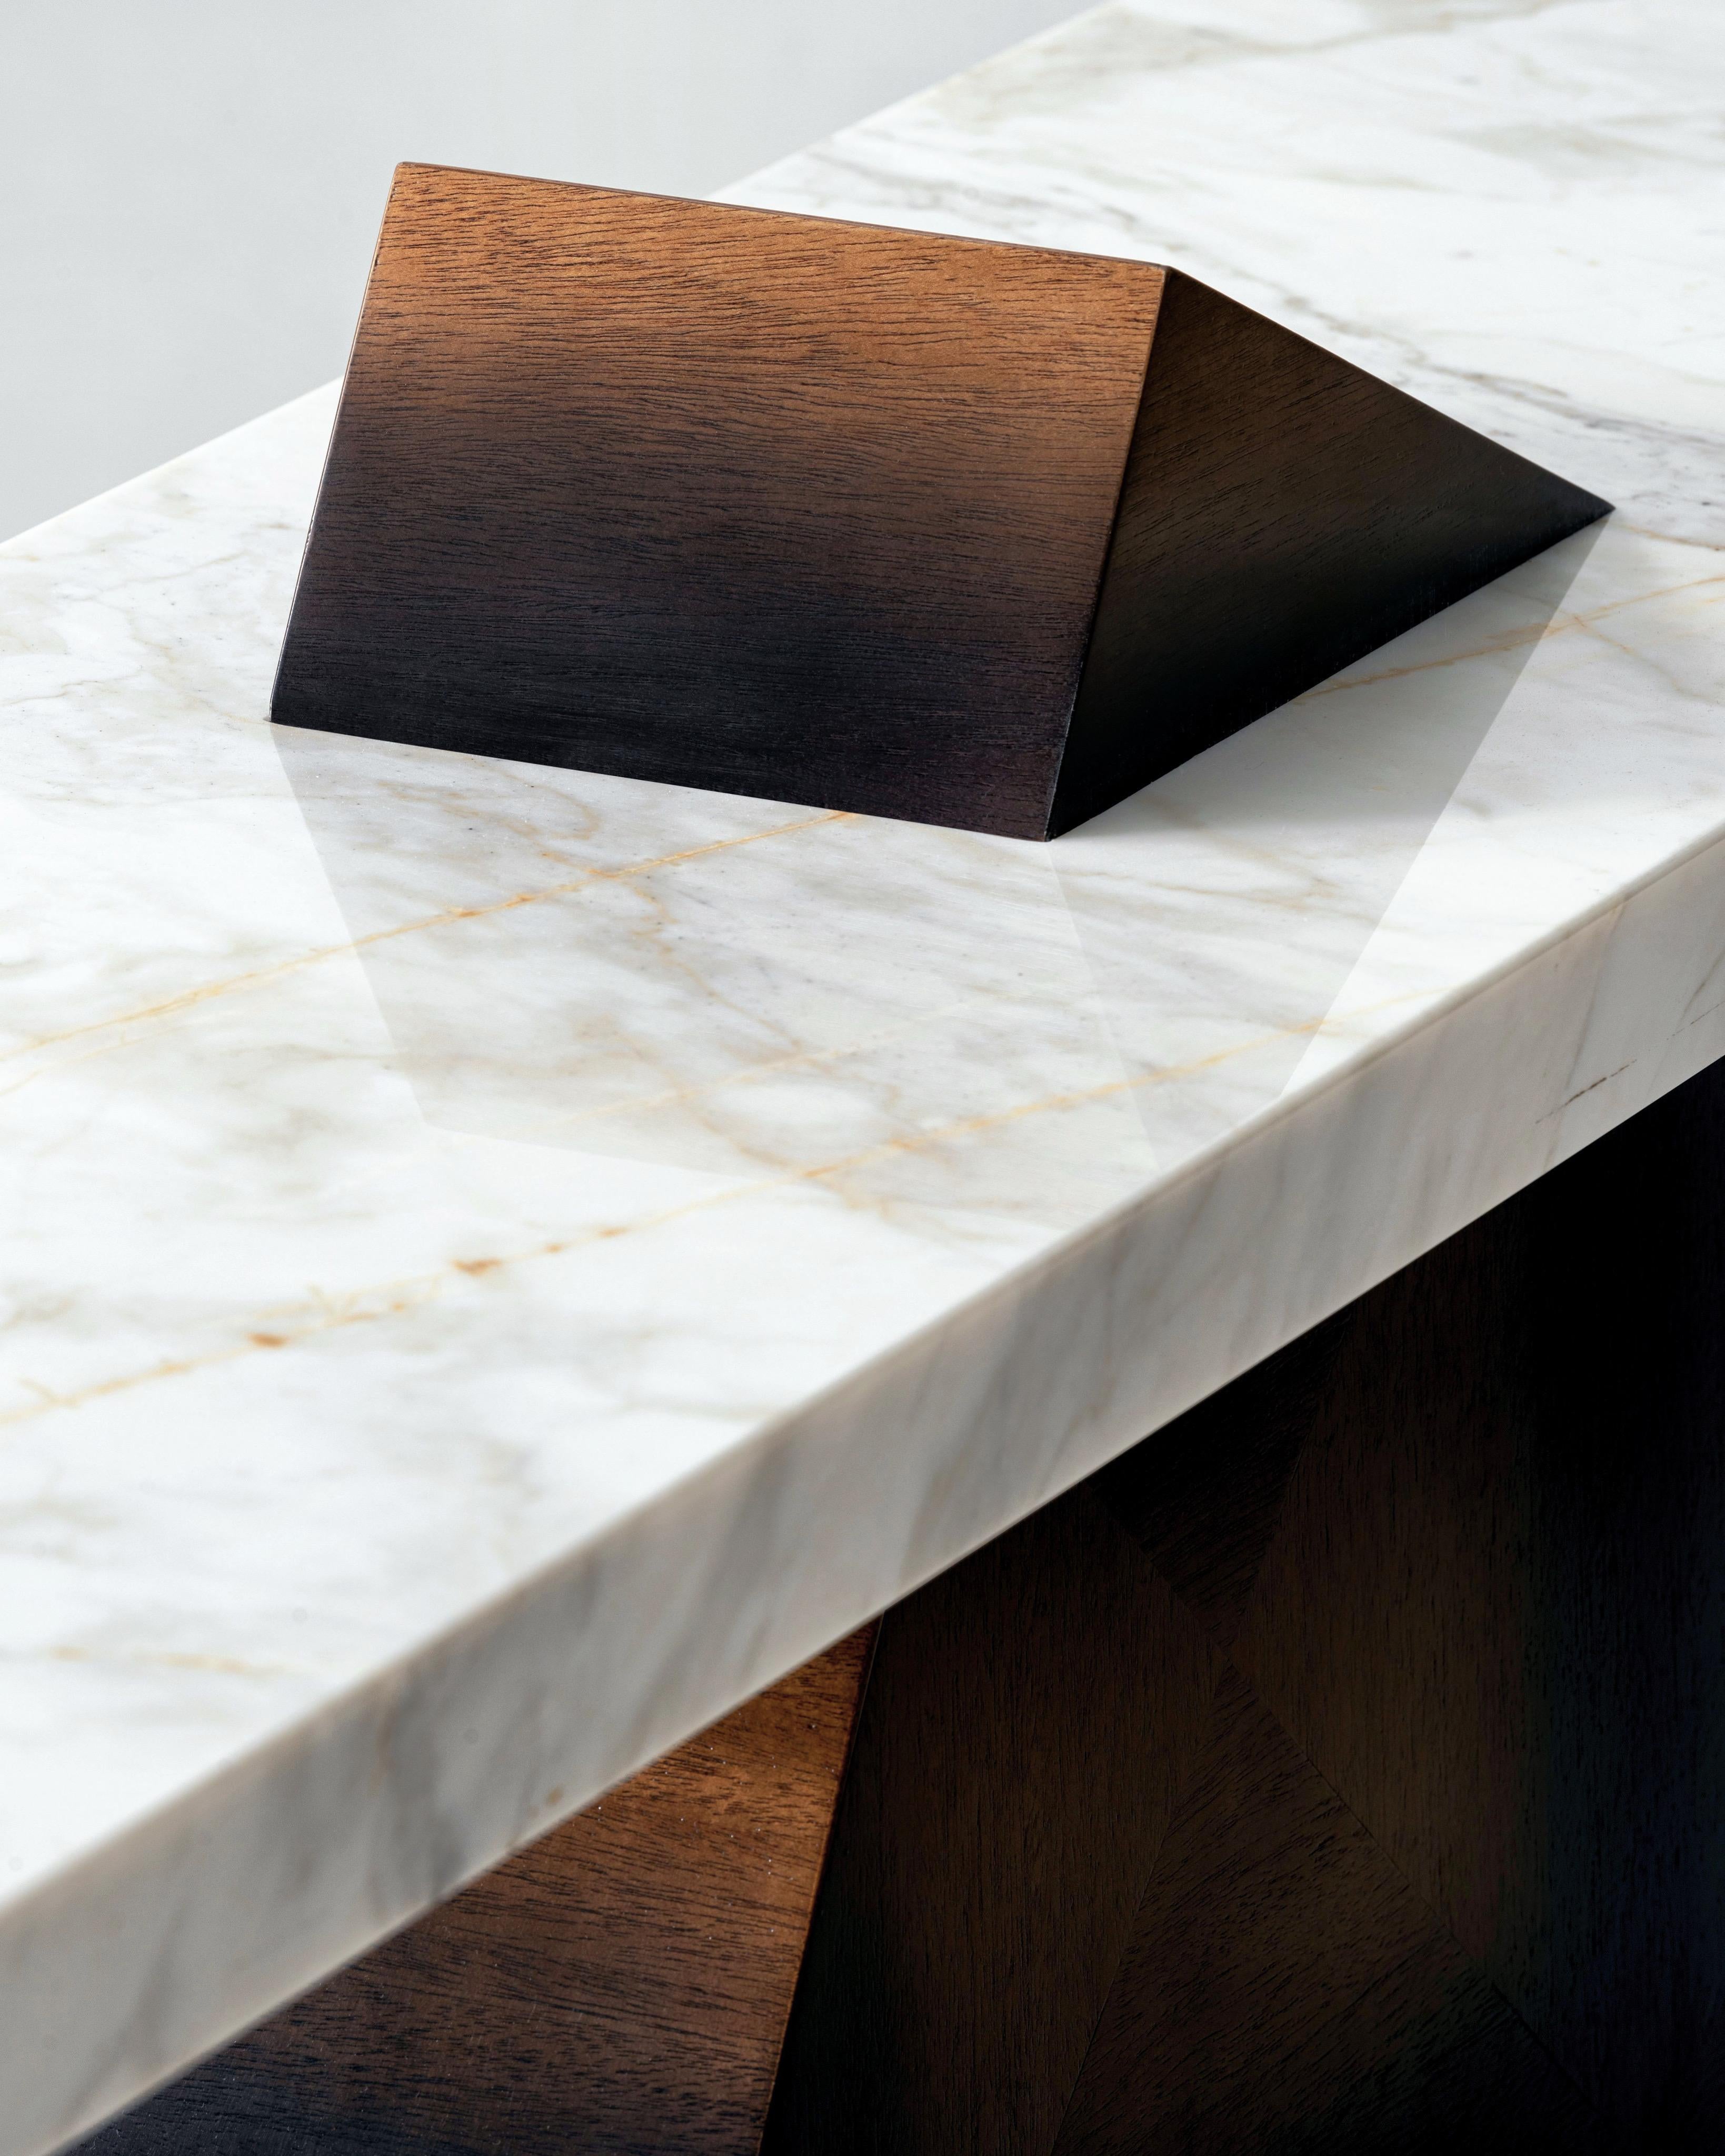 A symphony of form and function, the tilted balance of the console table beckons with its striking deconstructionist design. Calacatta gold marble and richly stained walnut wood come together in a subtle gradient, inviting one to surrender to